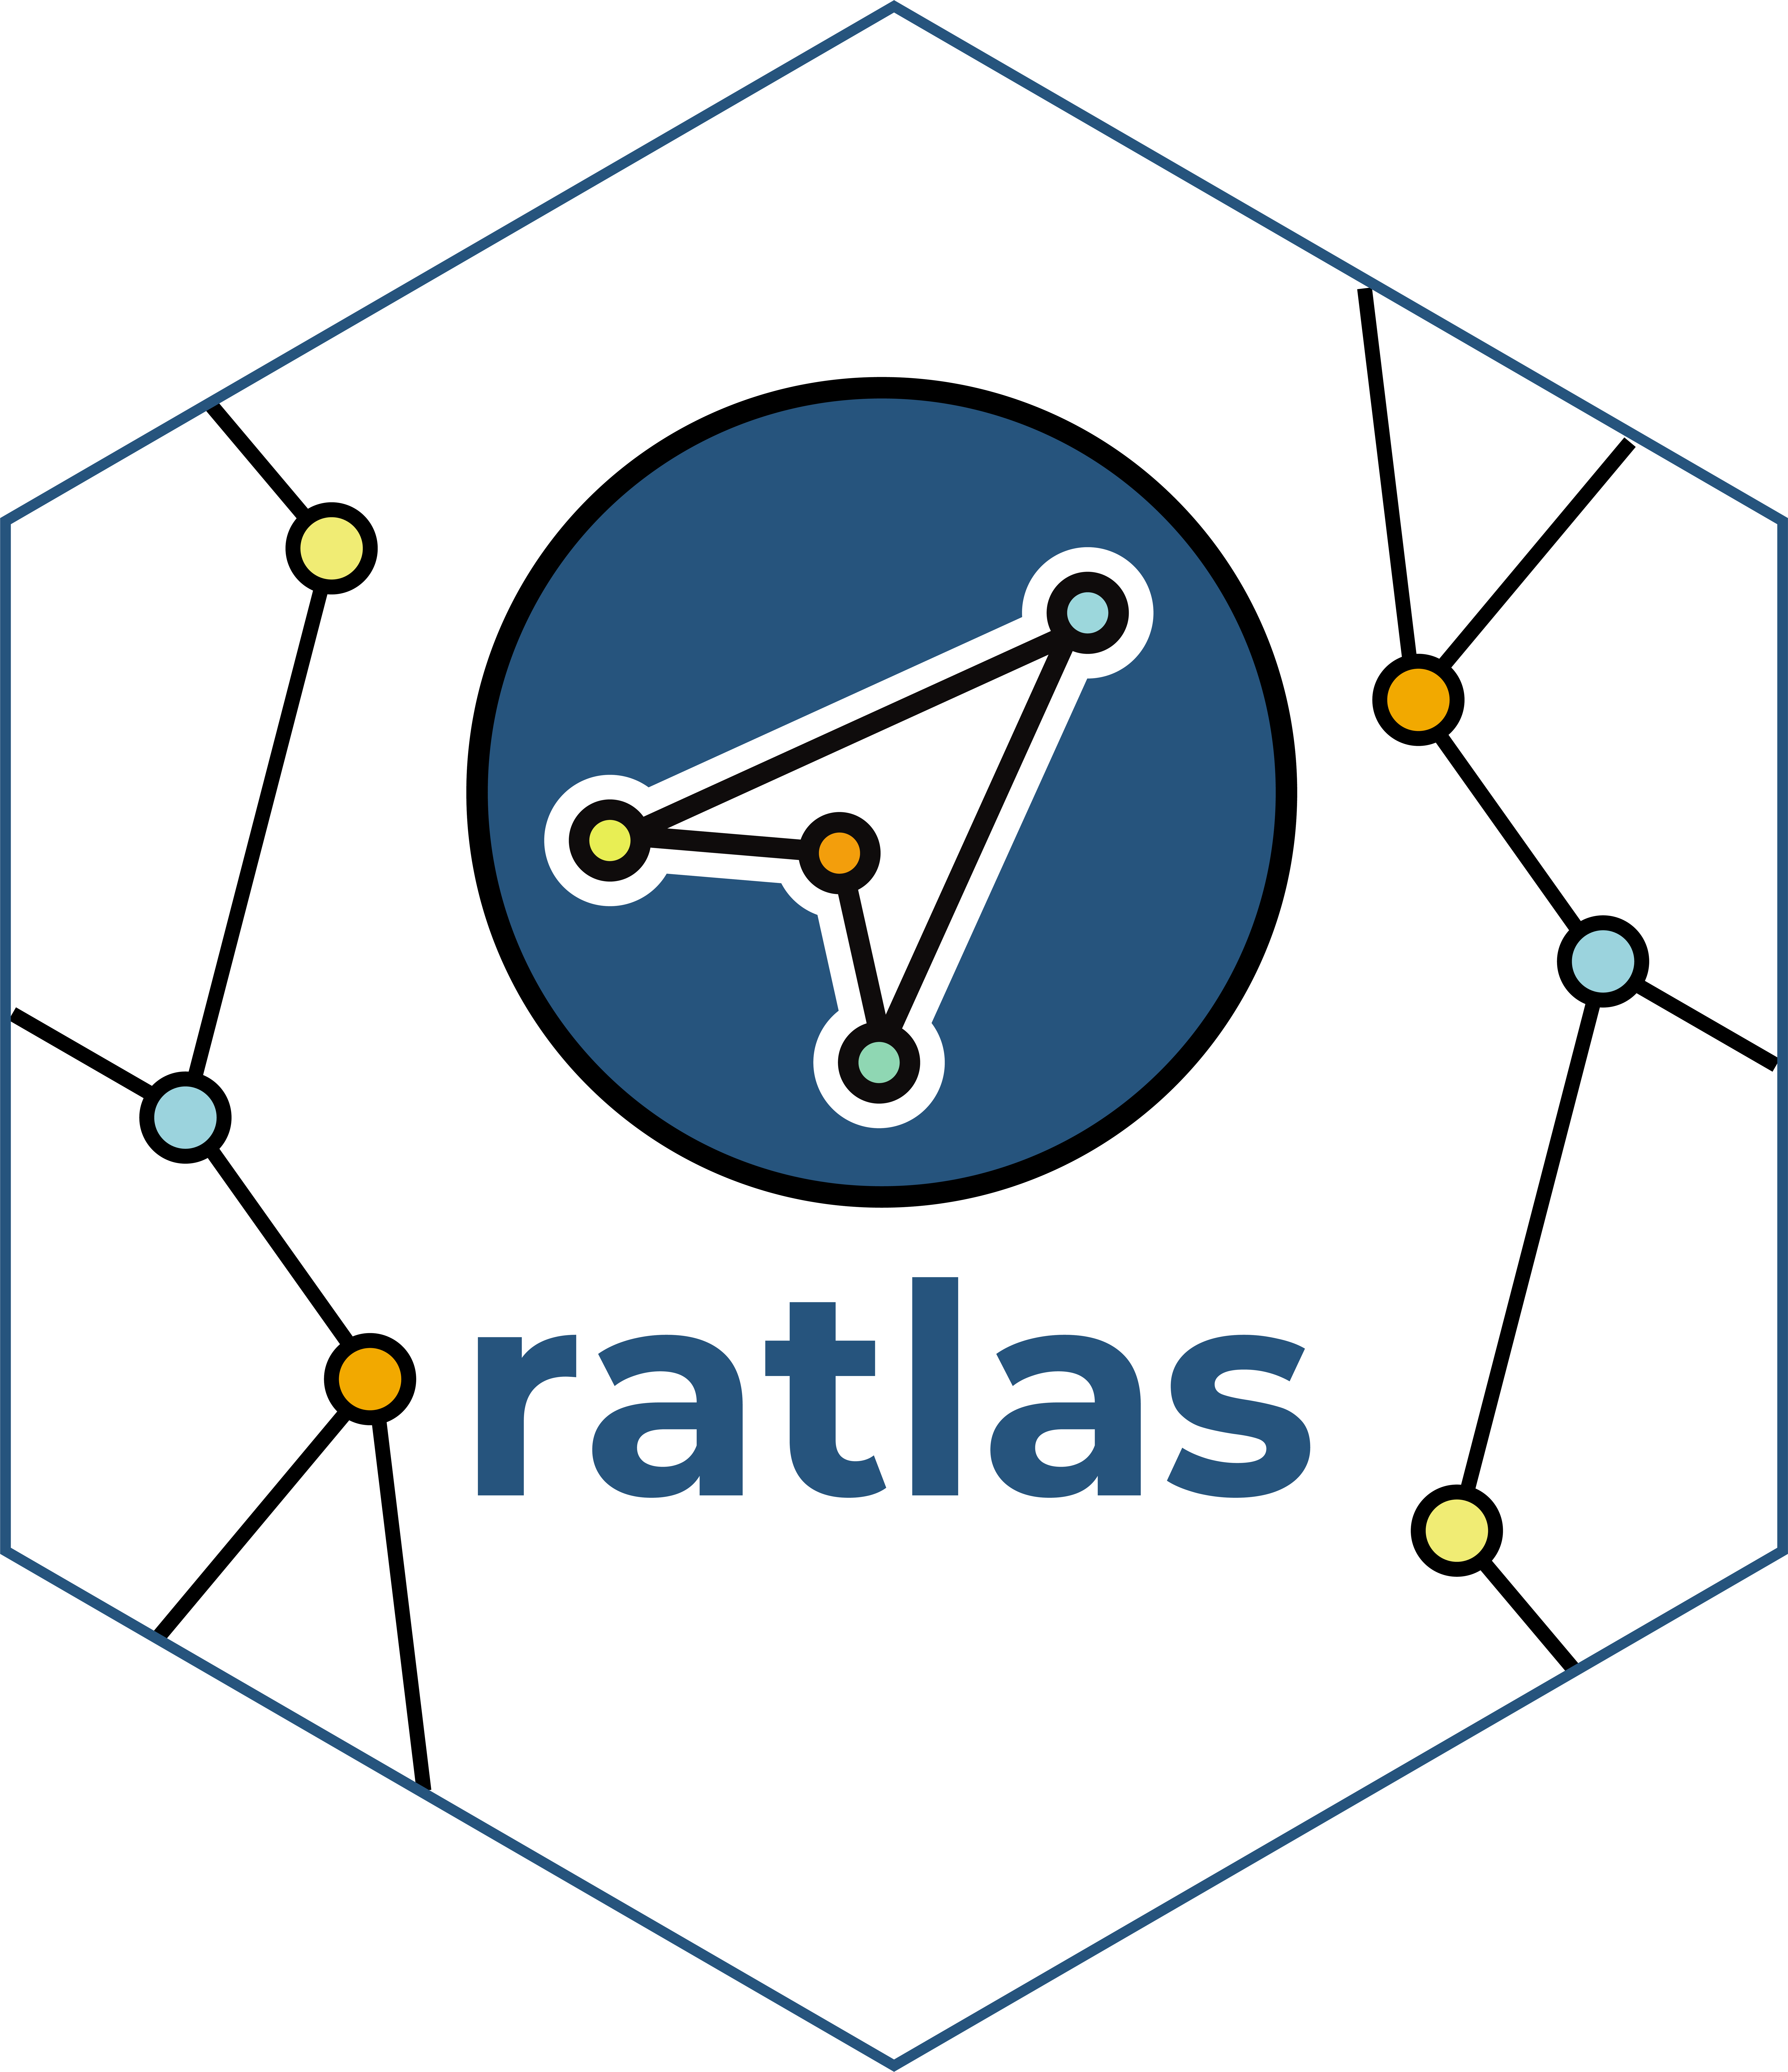 Hex logo for the ratlas package.